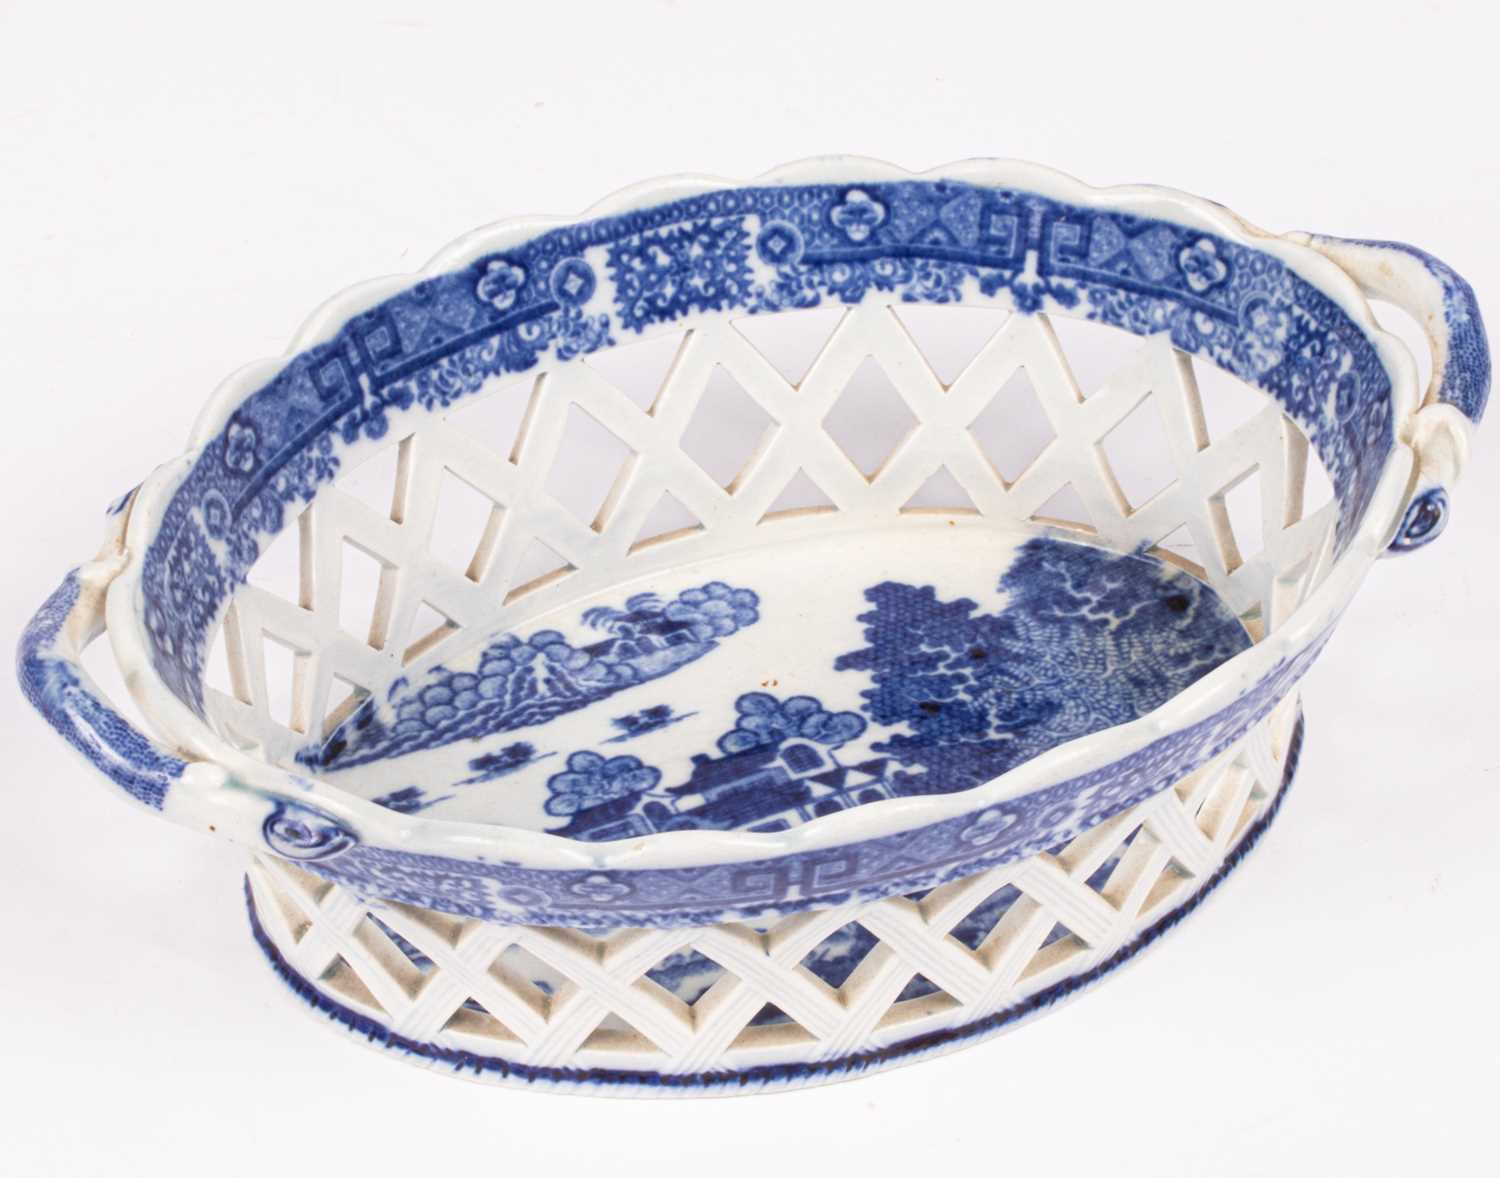 A Caughley blue and white porcelain oval basket - Image 2 of 6